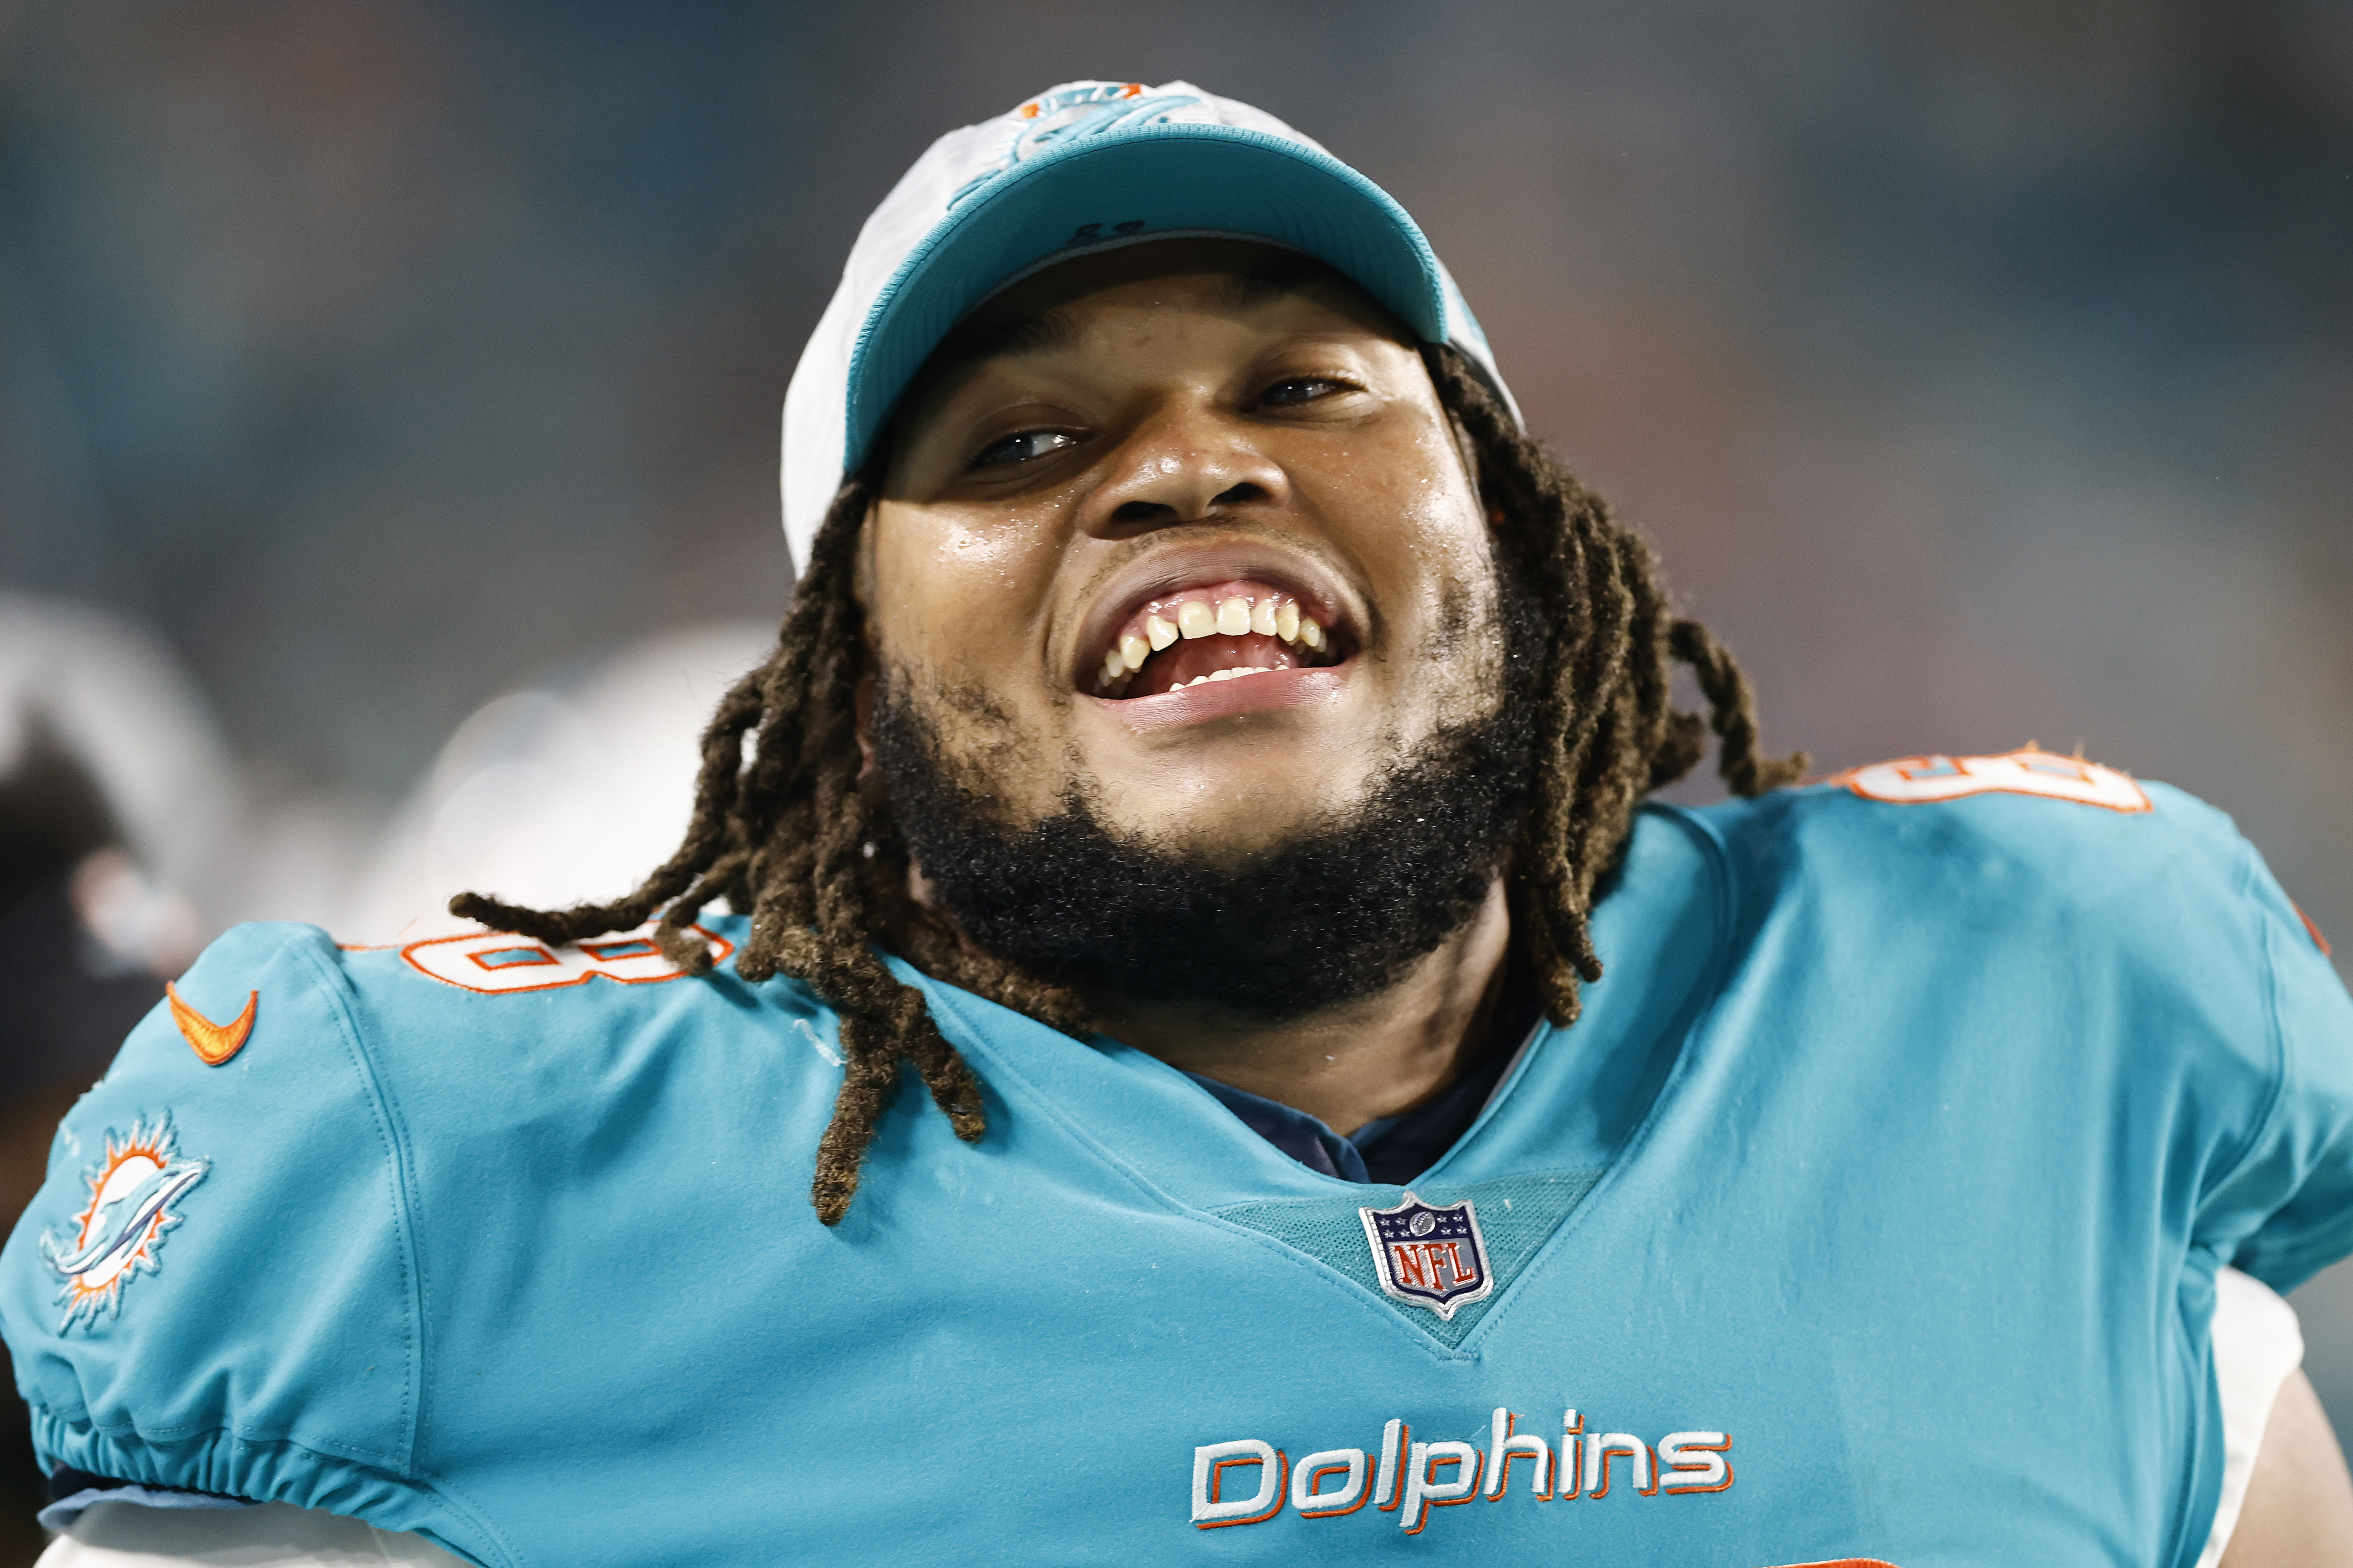 Robert Hunt #68 of the Miami Dolphins laughs against the Atlanta Falcons during a preseason game at Hard Rock Stadium on August 21, 2021 in Miami Gardens, Florida.